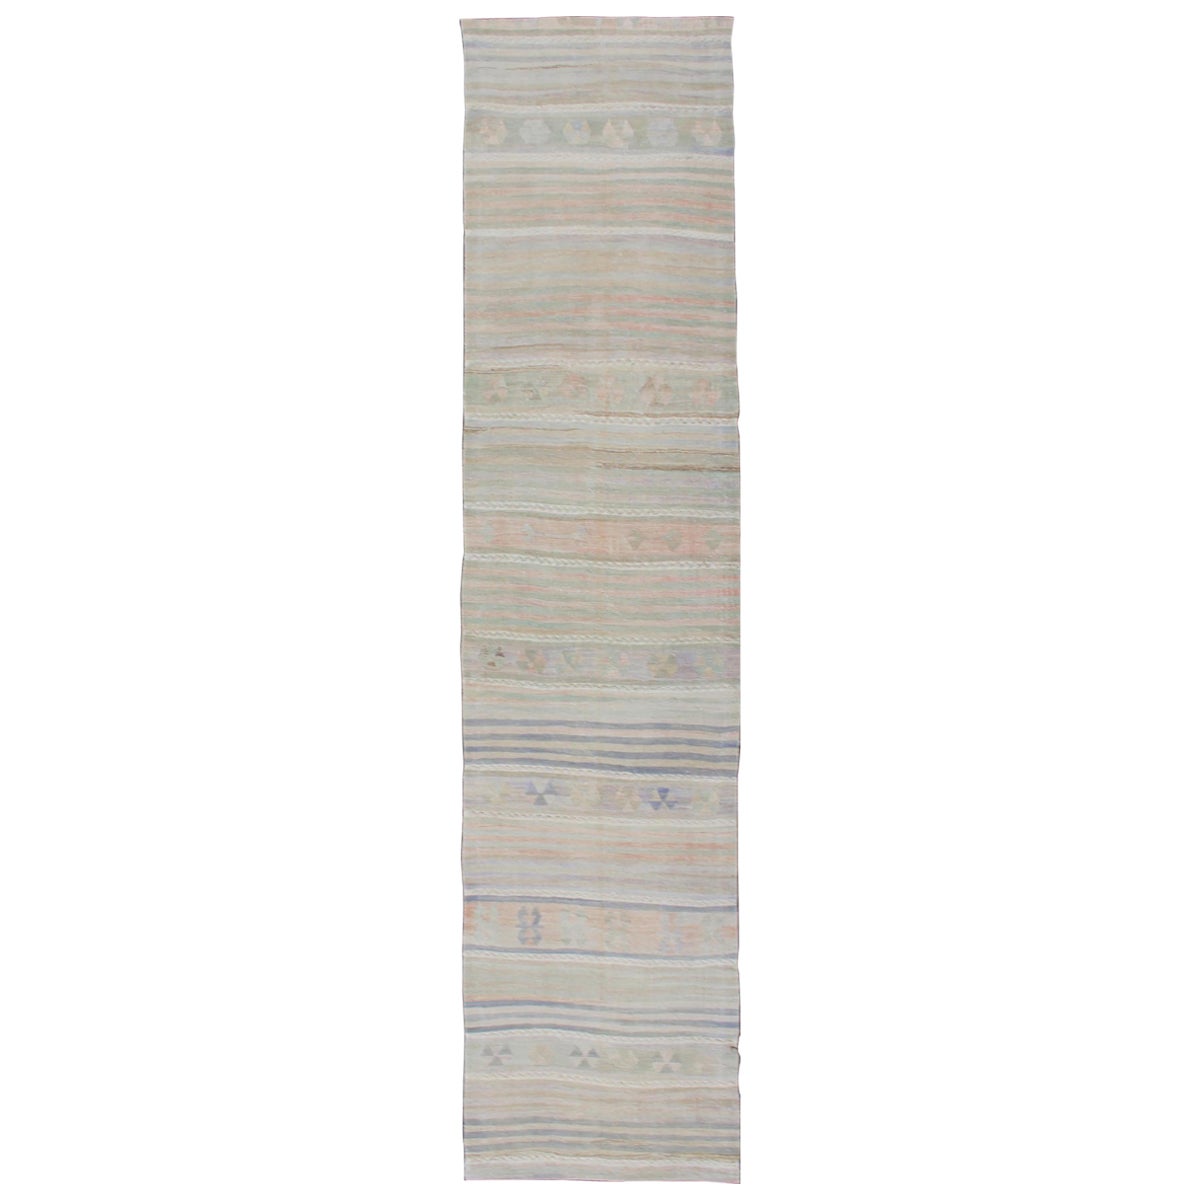 Vintage Turkish Kilim Runner with Soft Stripes and Modern Design in Muted Colors For Sale